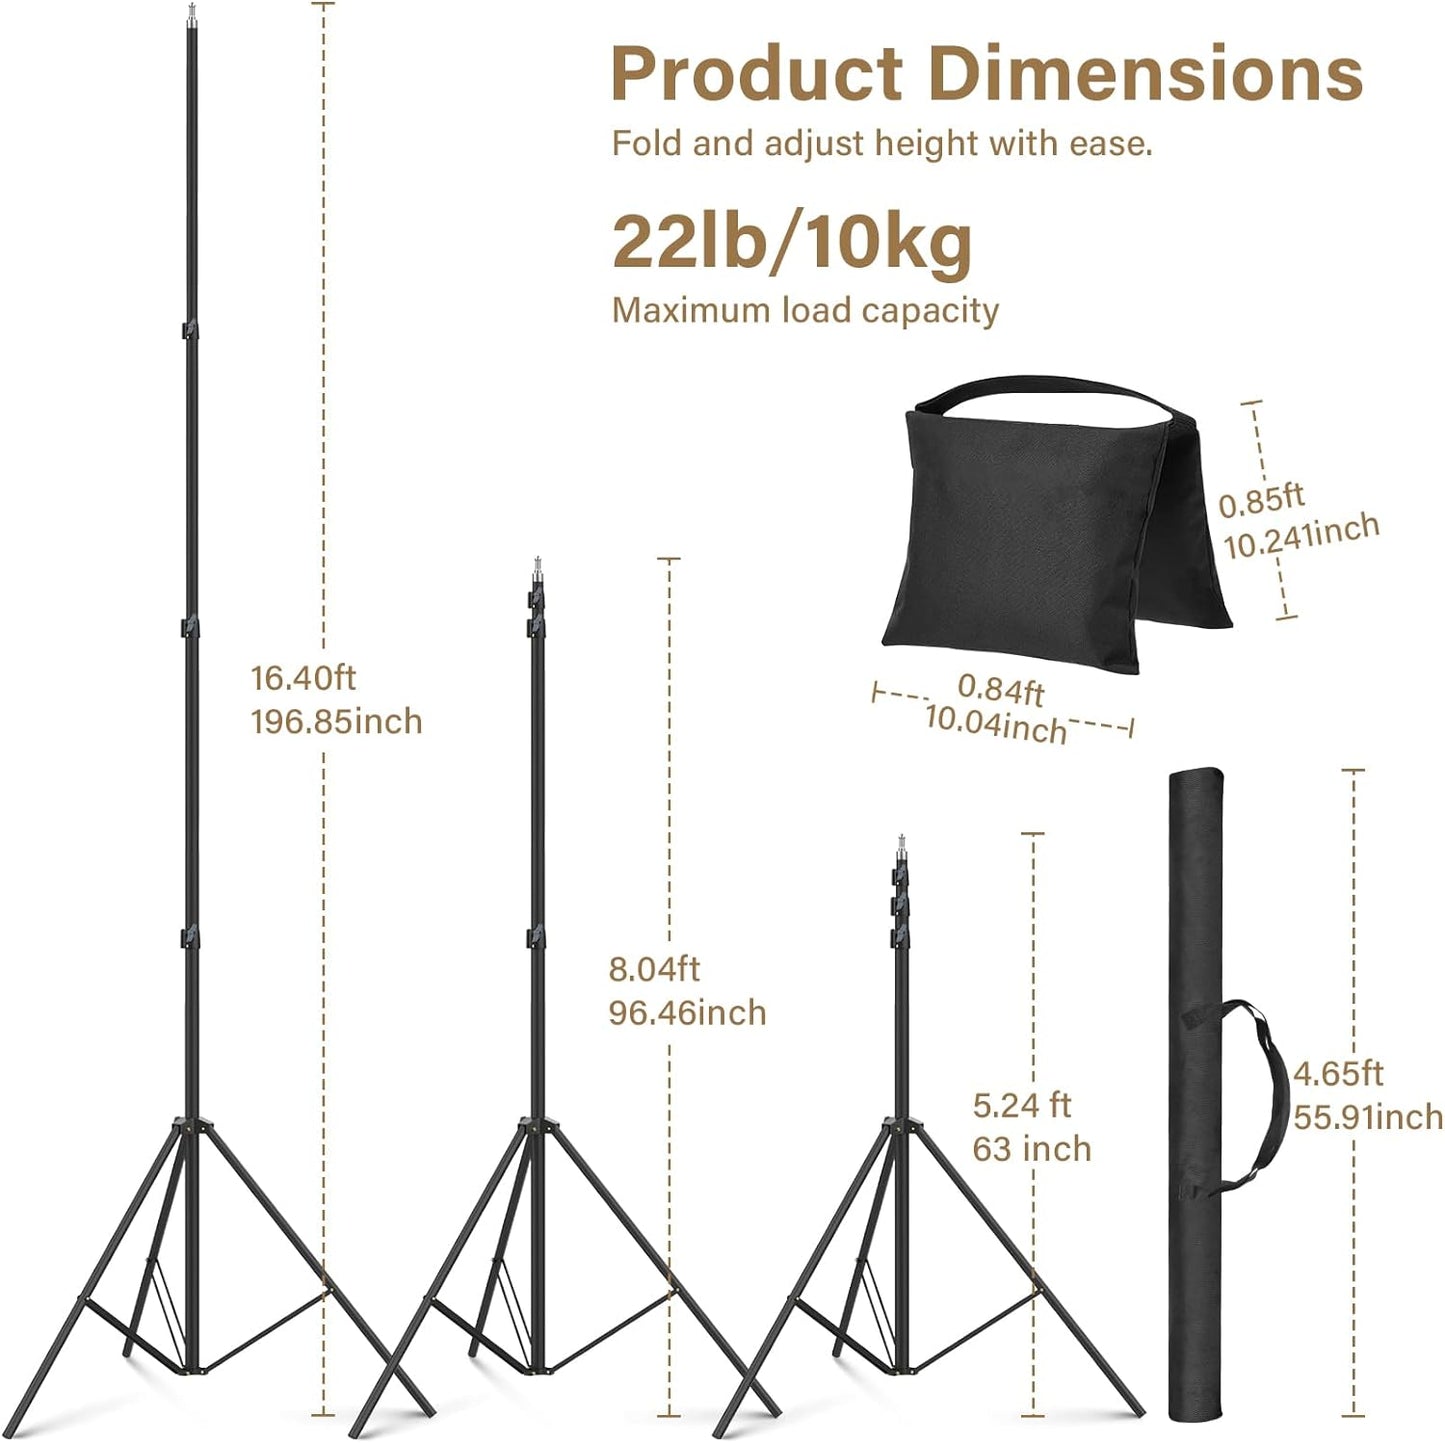 16.4' Heavy Duty Light Stand Photography, Sdfghj 16.4ft/197inch Spring Cushioned Tall Sky High Tripod for Video Camera Filming Sports Games Photography, Soft Boxes, Speed Light, Strobe, Umbrellas